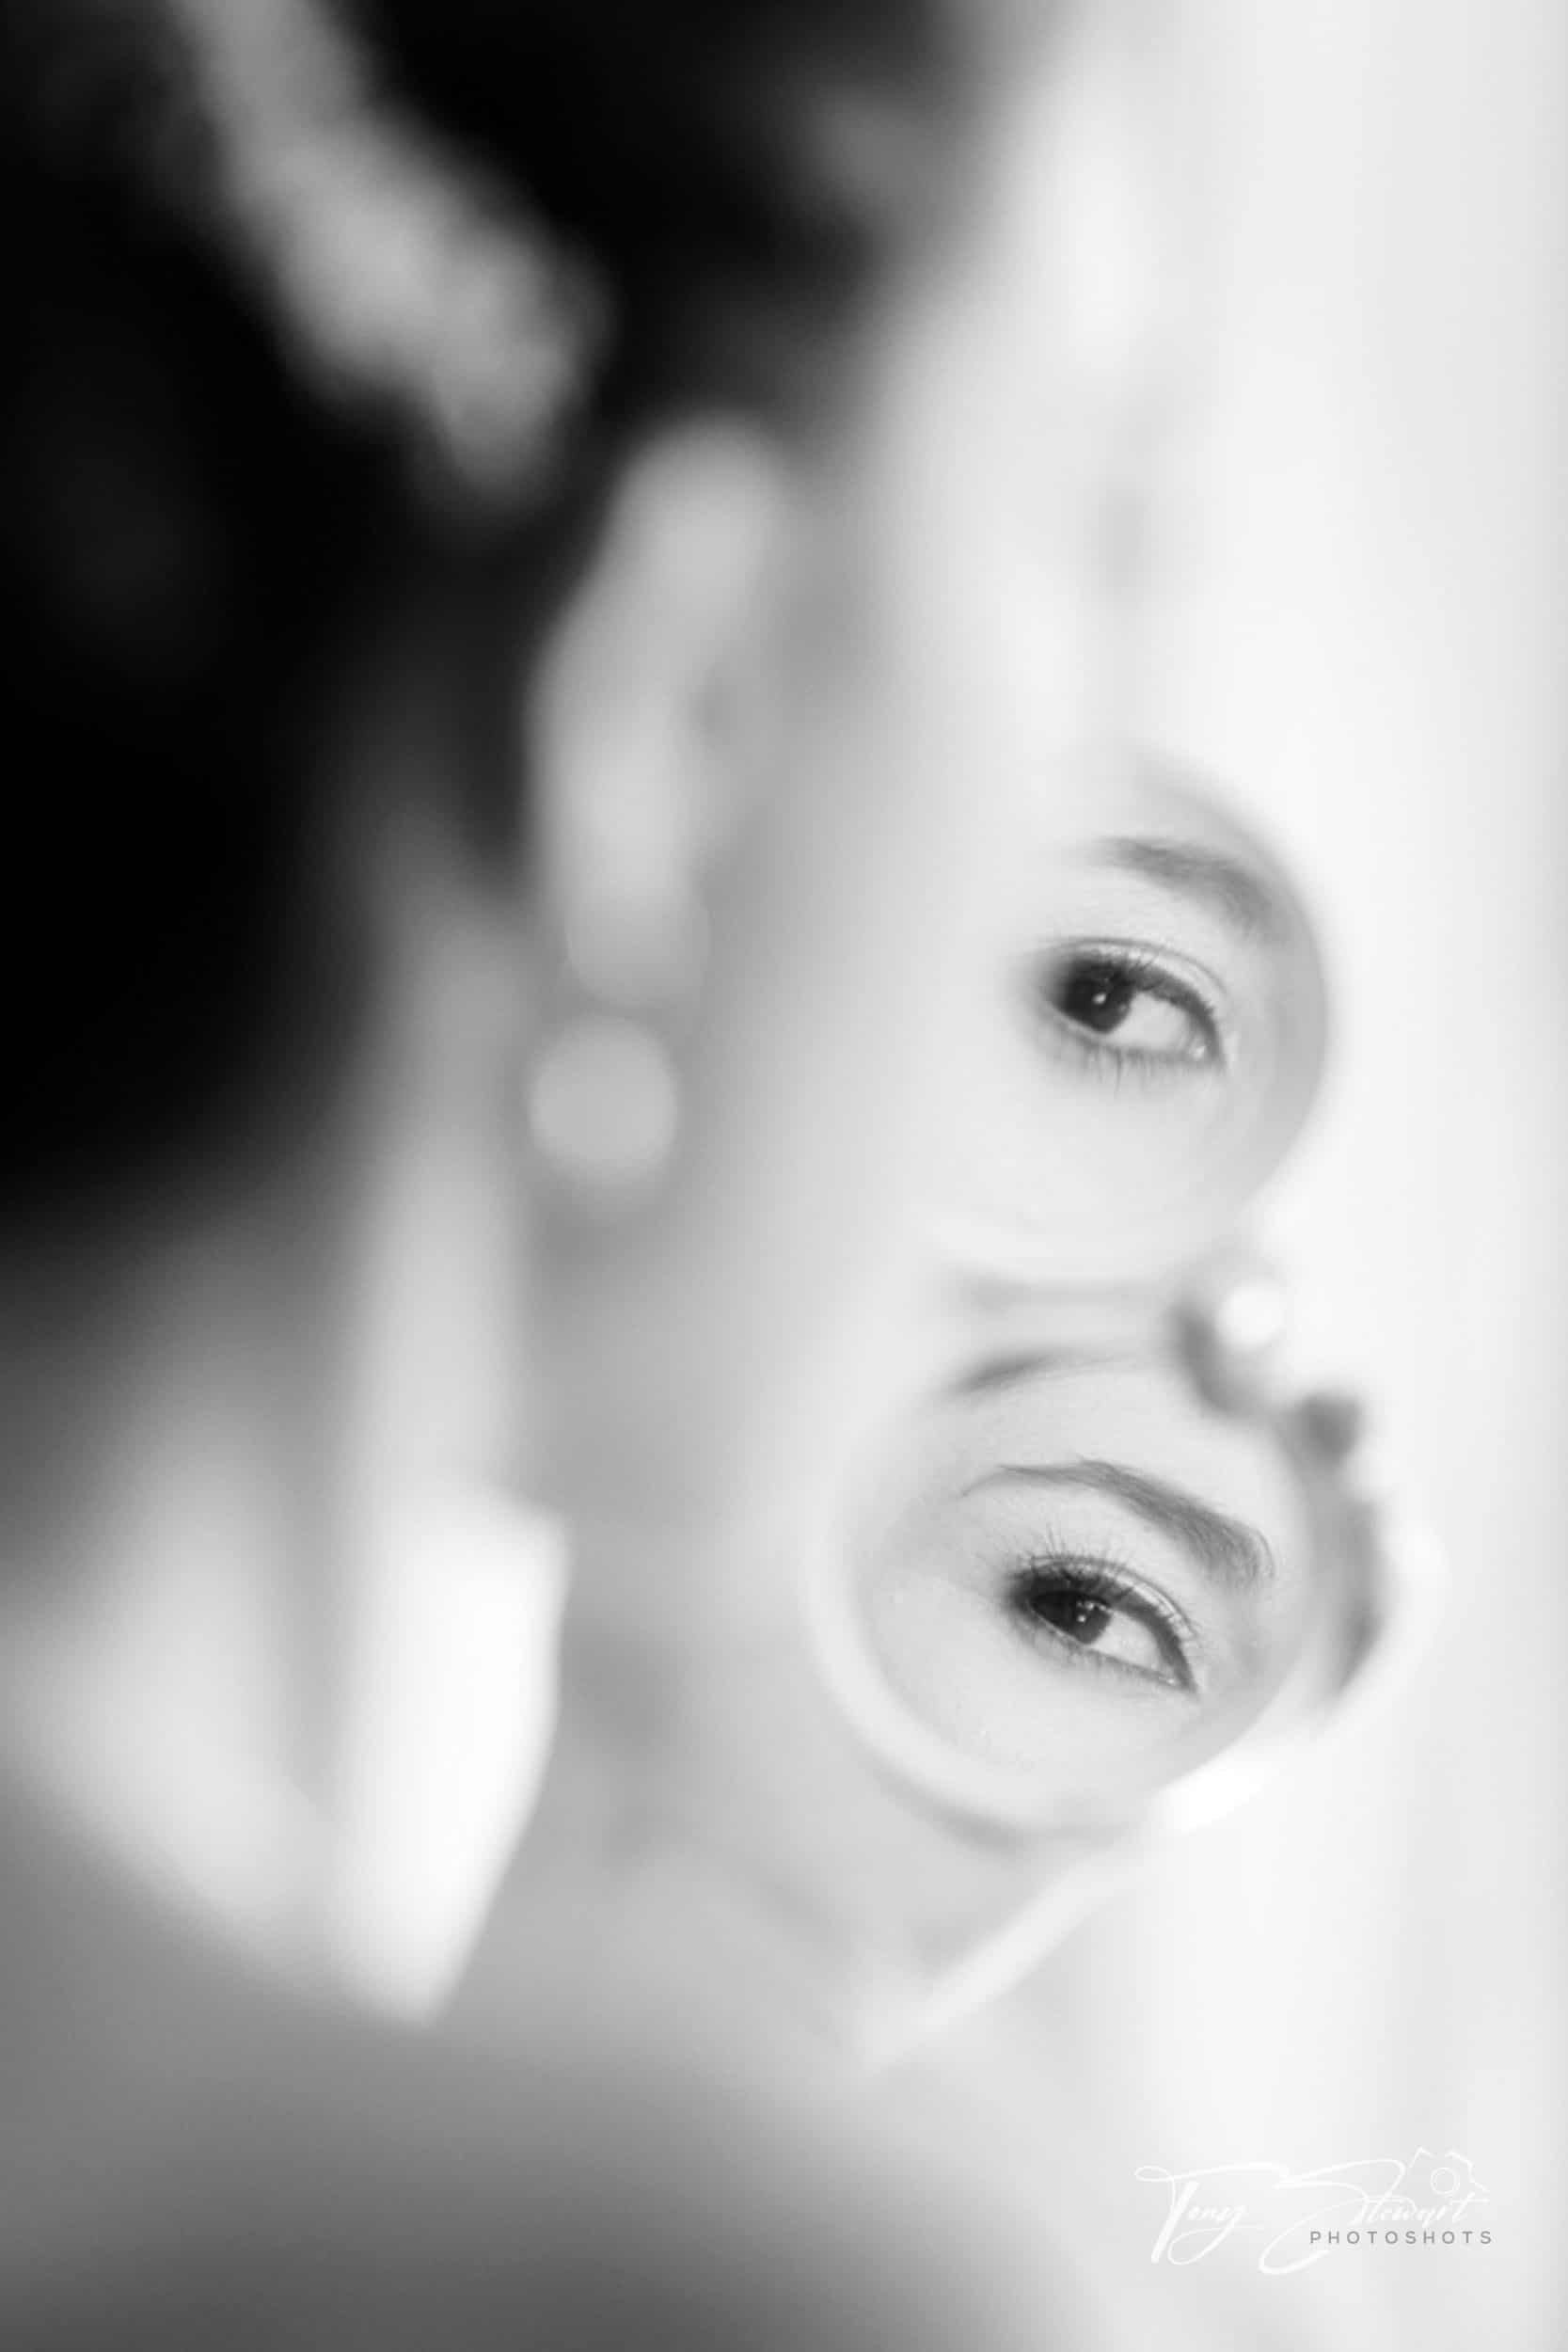 Bride's eye reflected in make up compact.